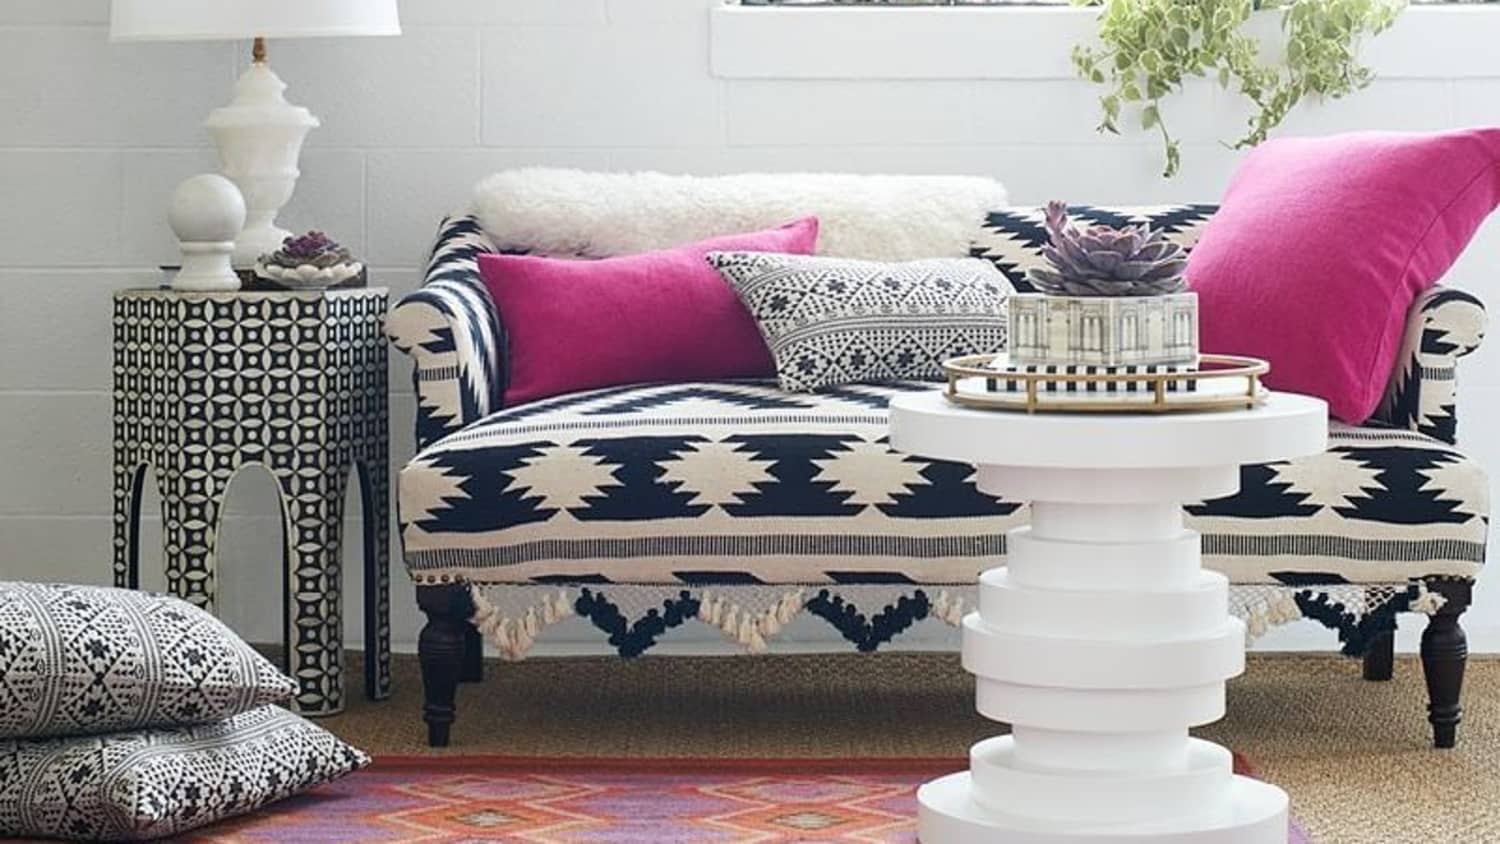 decorating with patterned sofa